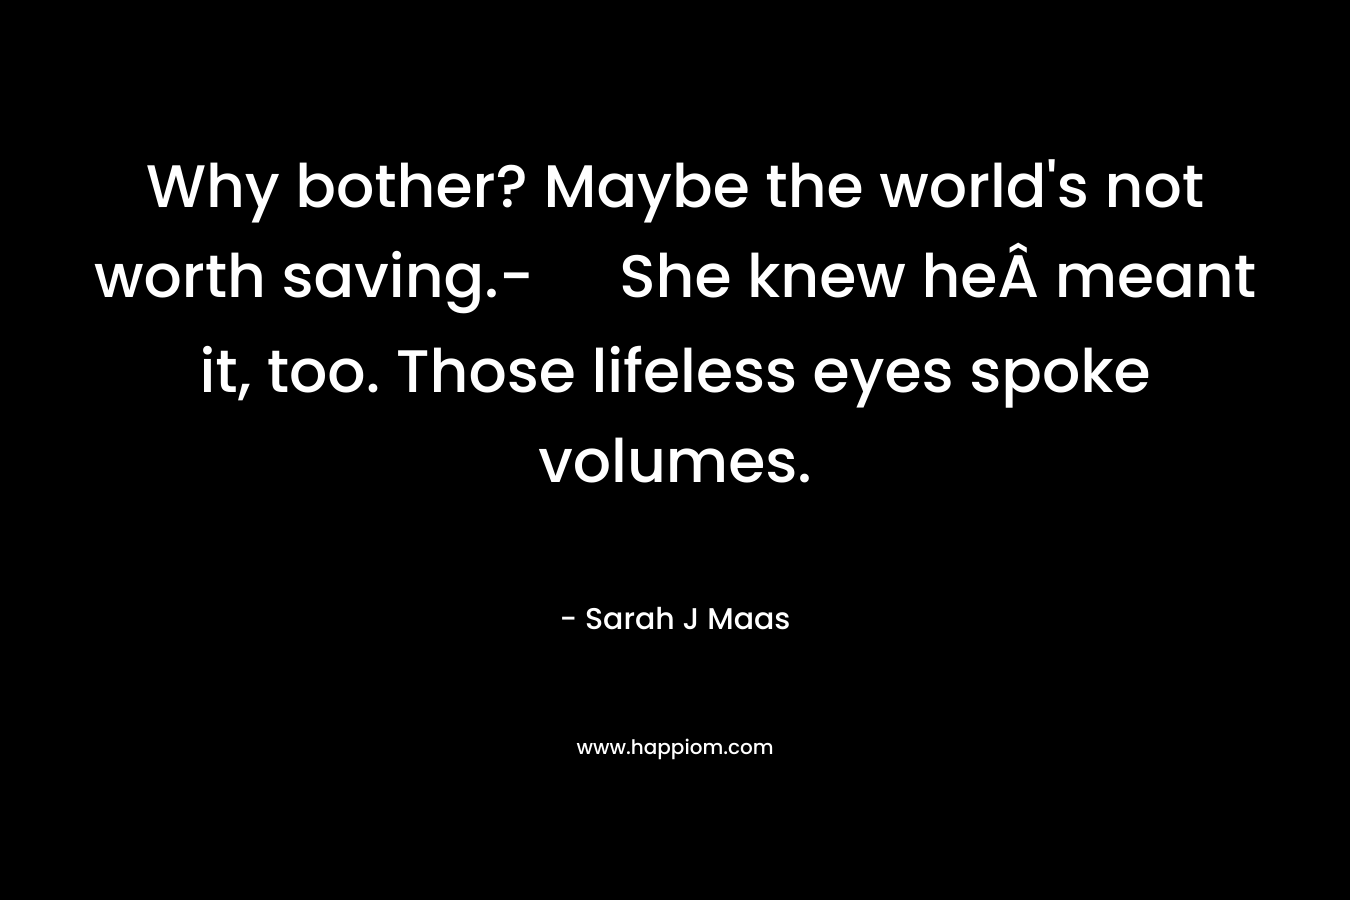 Why bother? Maybe the world’s not worth saving.- She knew heÂ meant it, too. Those lifeless eyes spoke volumes. – Sarah J Maas